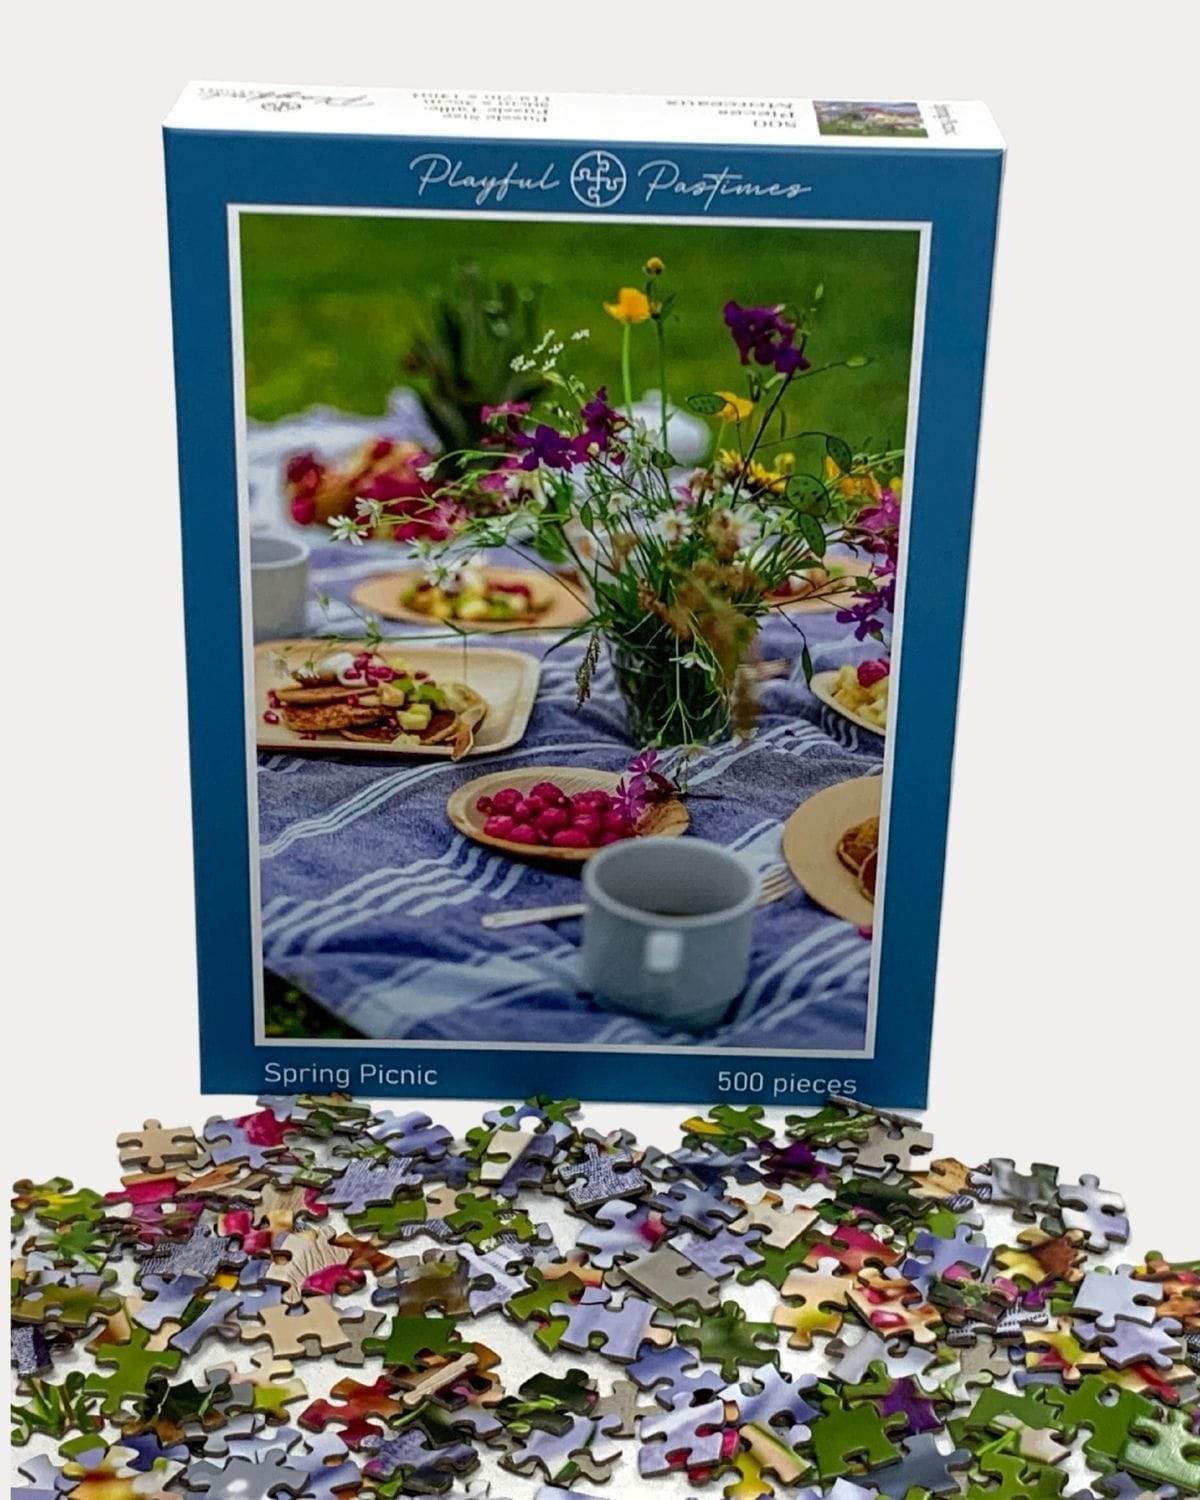 Playful Pastimes Jigsaw Puzzle Spring Picnic | 500 pieces Puzzle